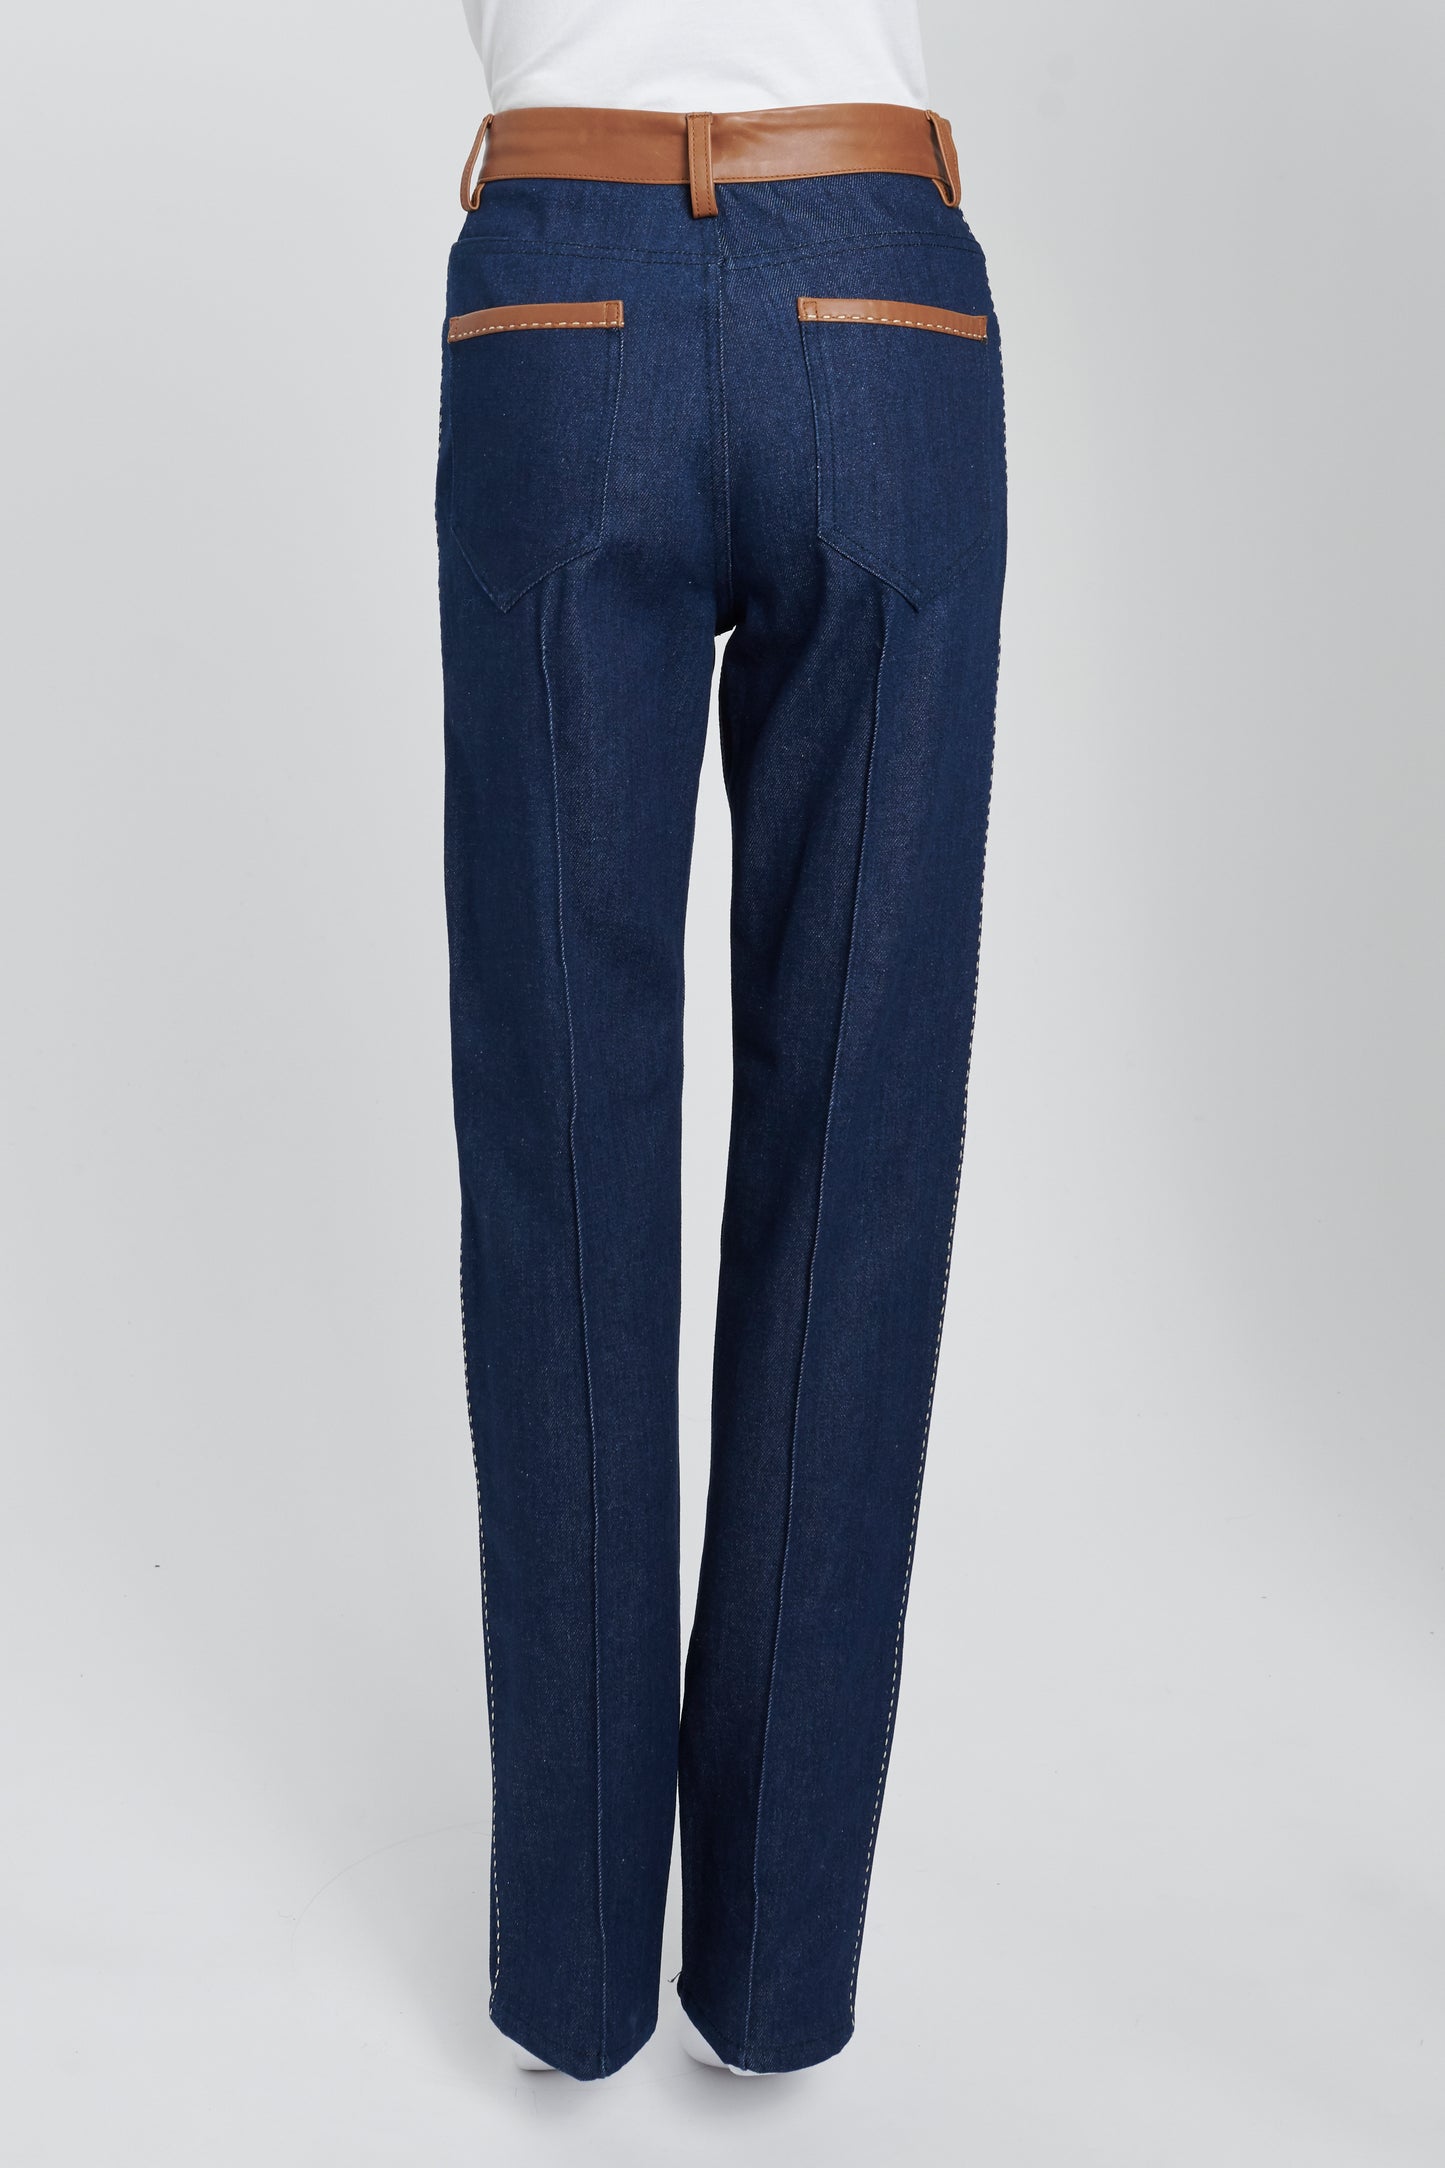 Indigo High-Waisted Jeans With Brown Leather Trim